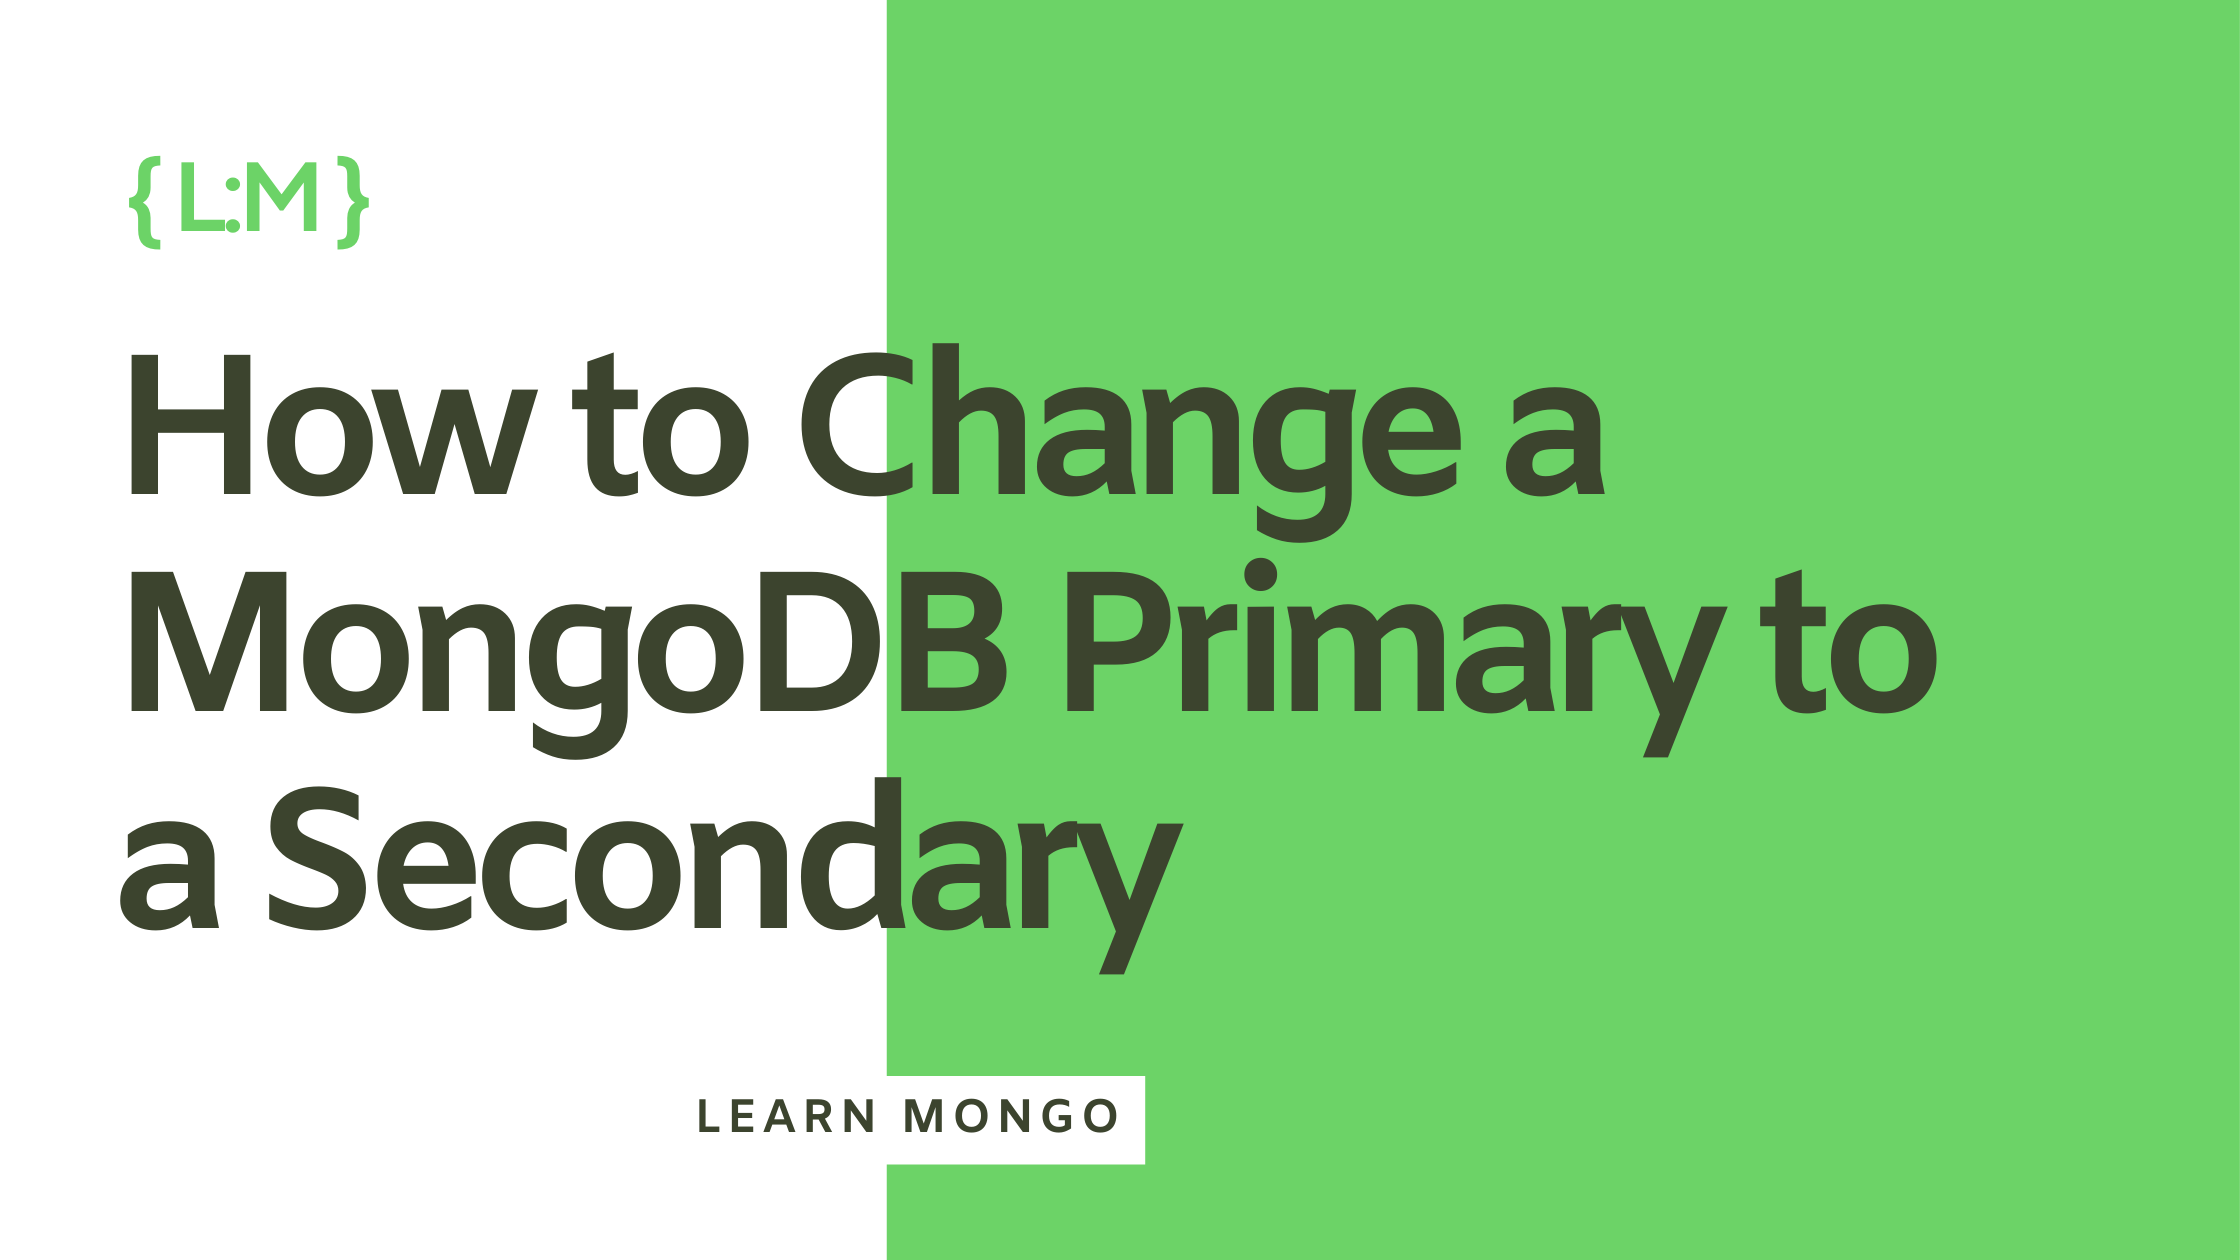 How to Change a MongoDB Primary to a Secondary